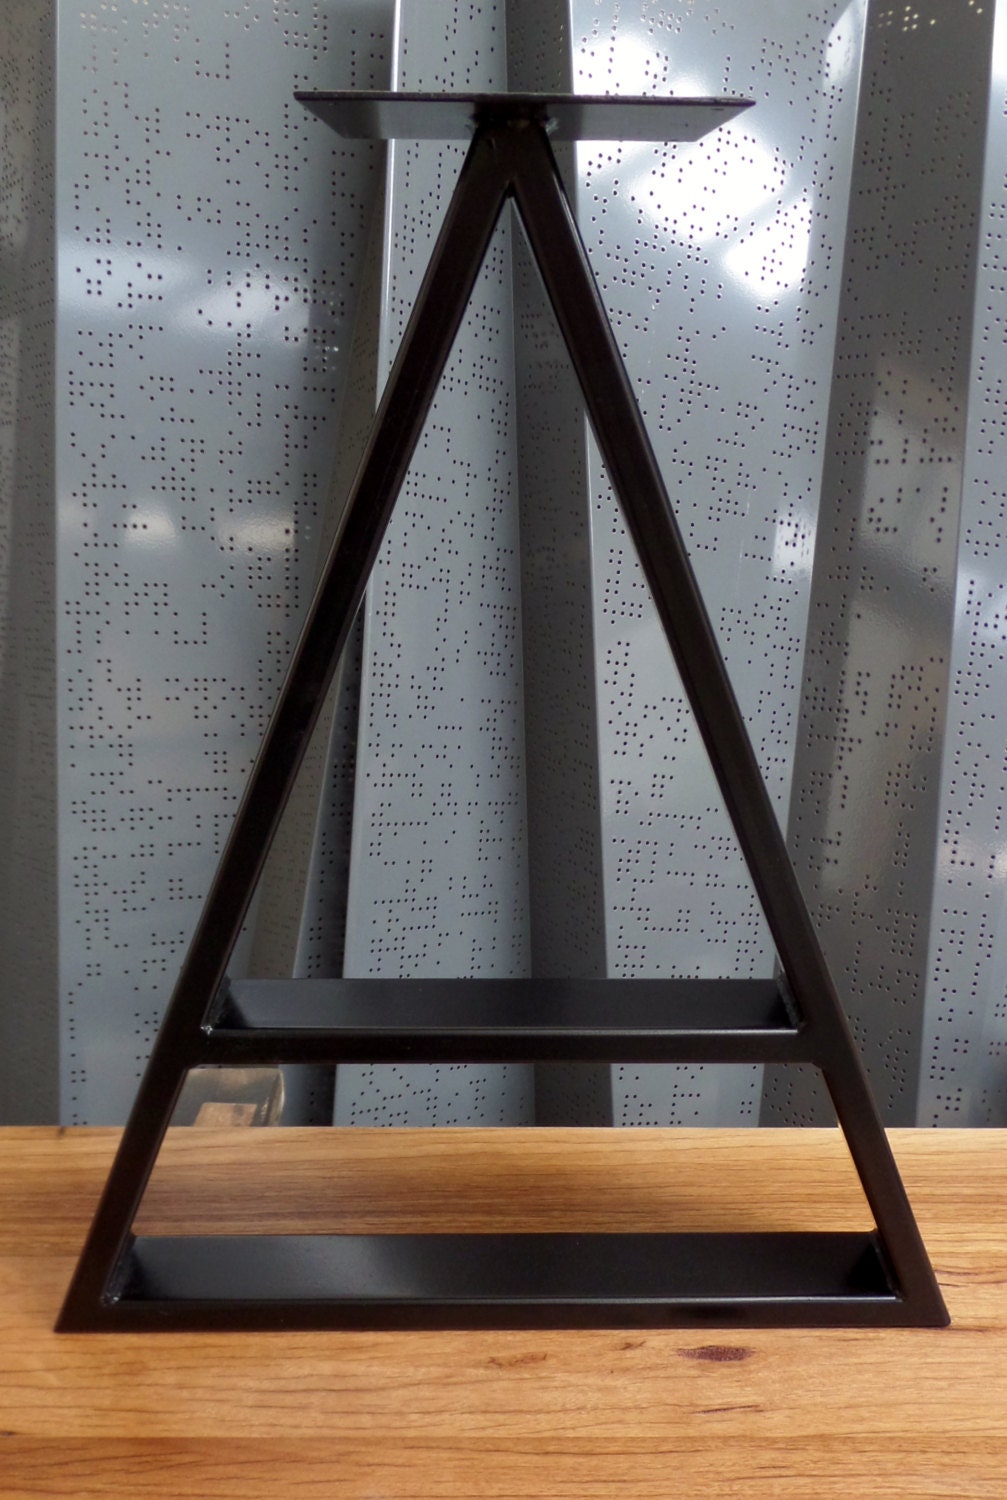 Triangular table bases. Perfect height for a dining table or | Etsy